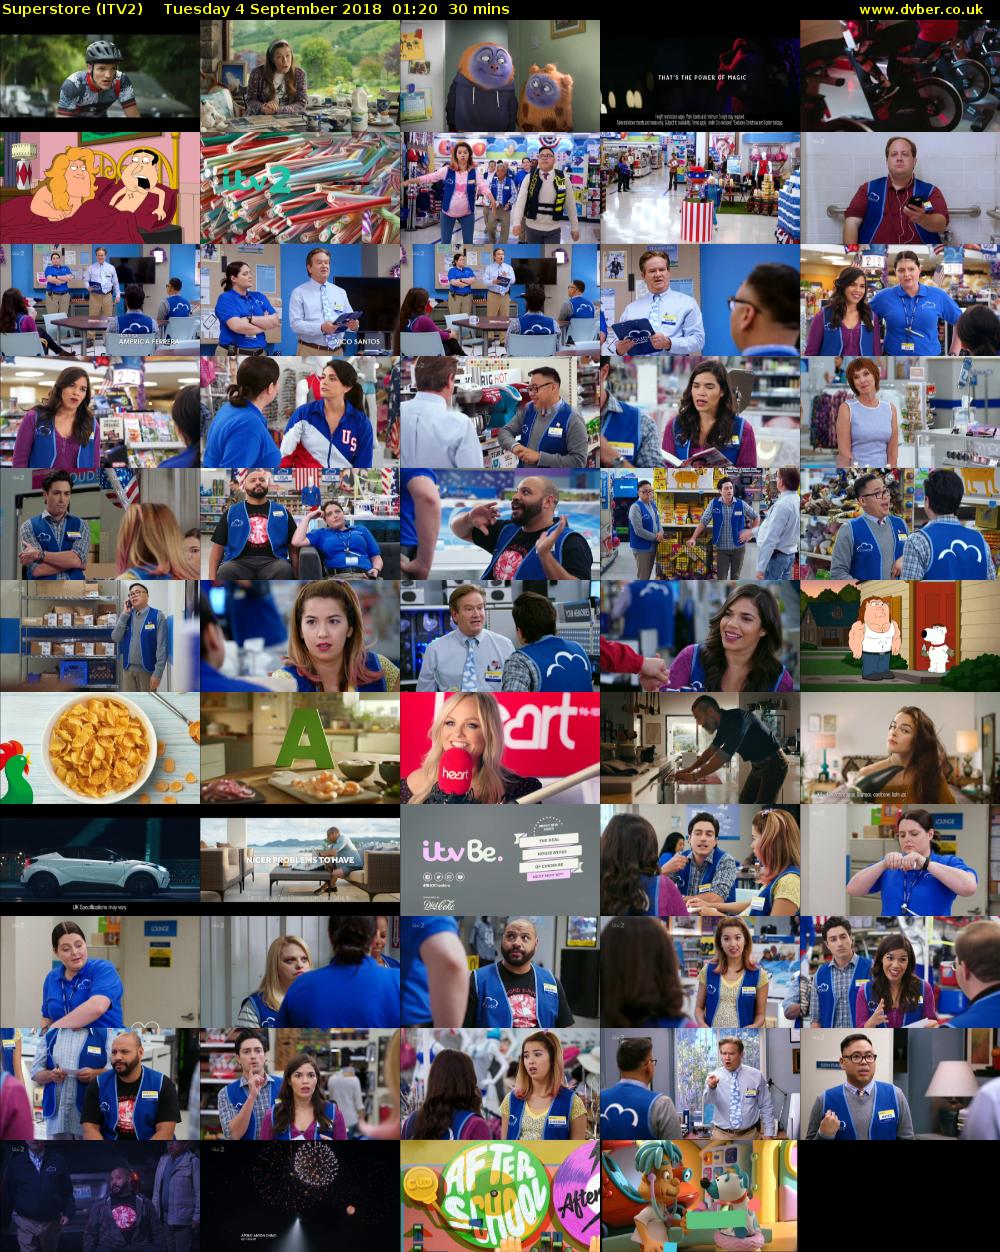 Superstore (ITV2) Tuesday 4 September 2018 01:20 - 01:50